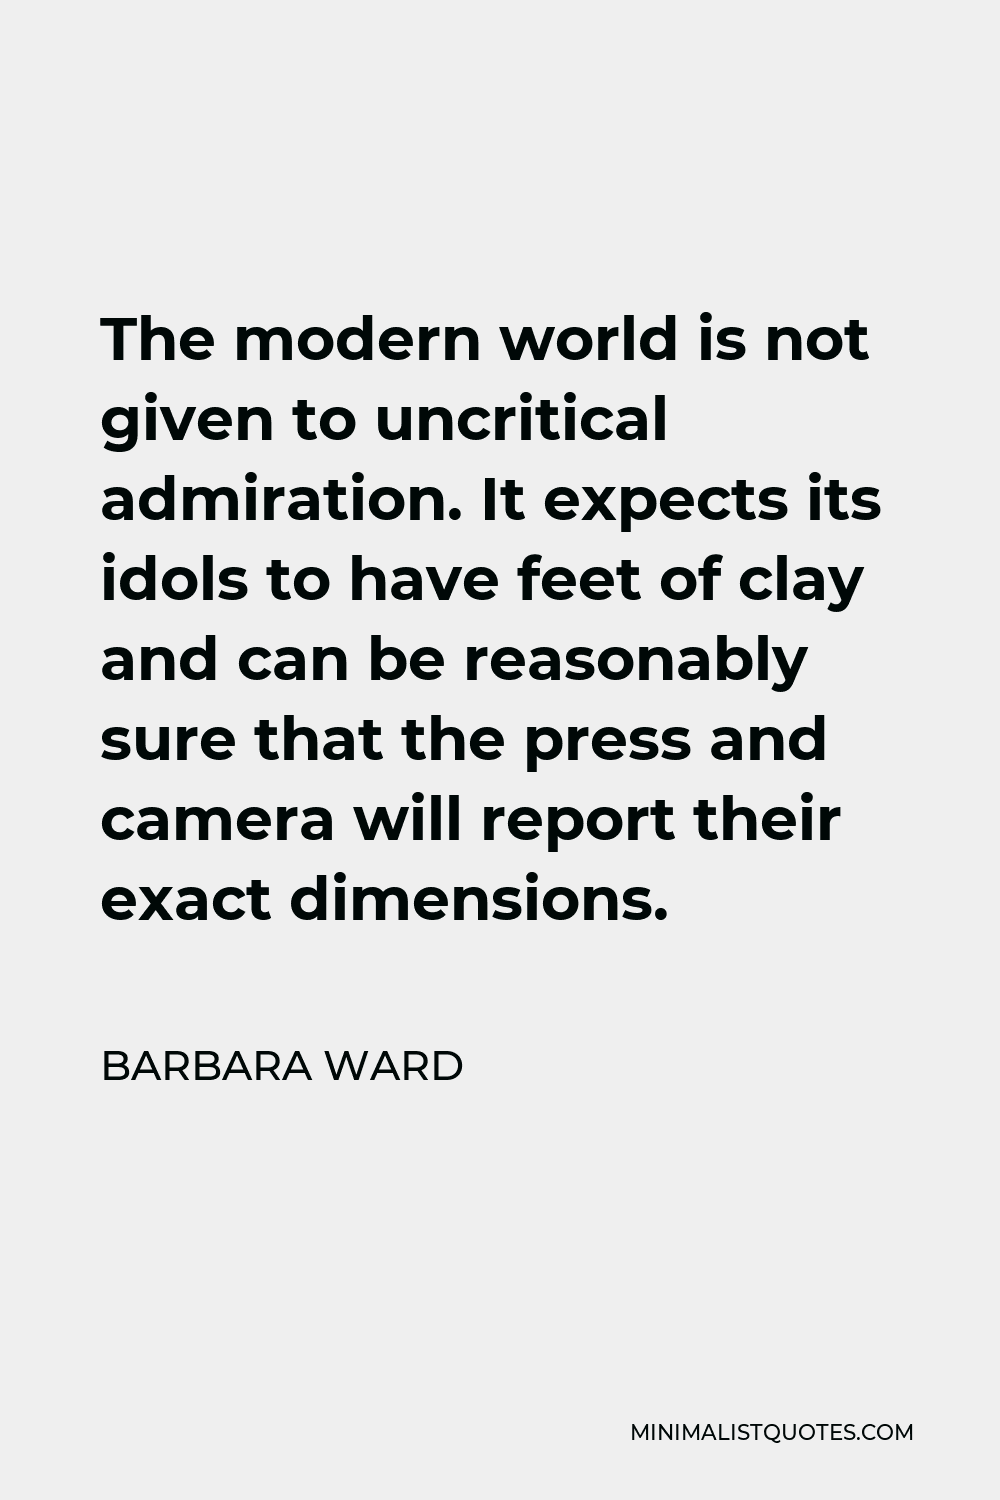 Barbara Ward Quote - The modern world is not given to uncritical admiration. It expects its idols to have feet of clay and can be reasonably sure that the press and camera will report their exact dimensions.